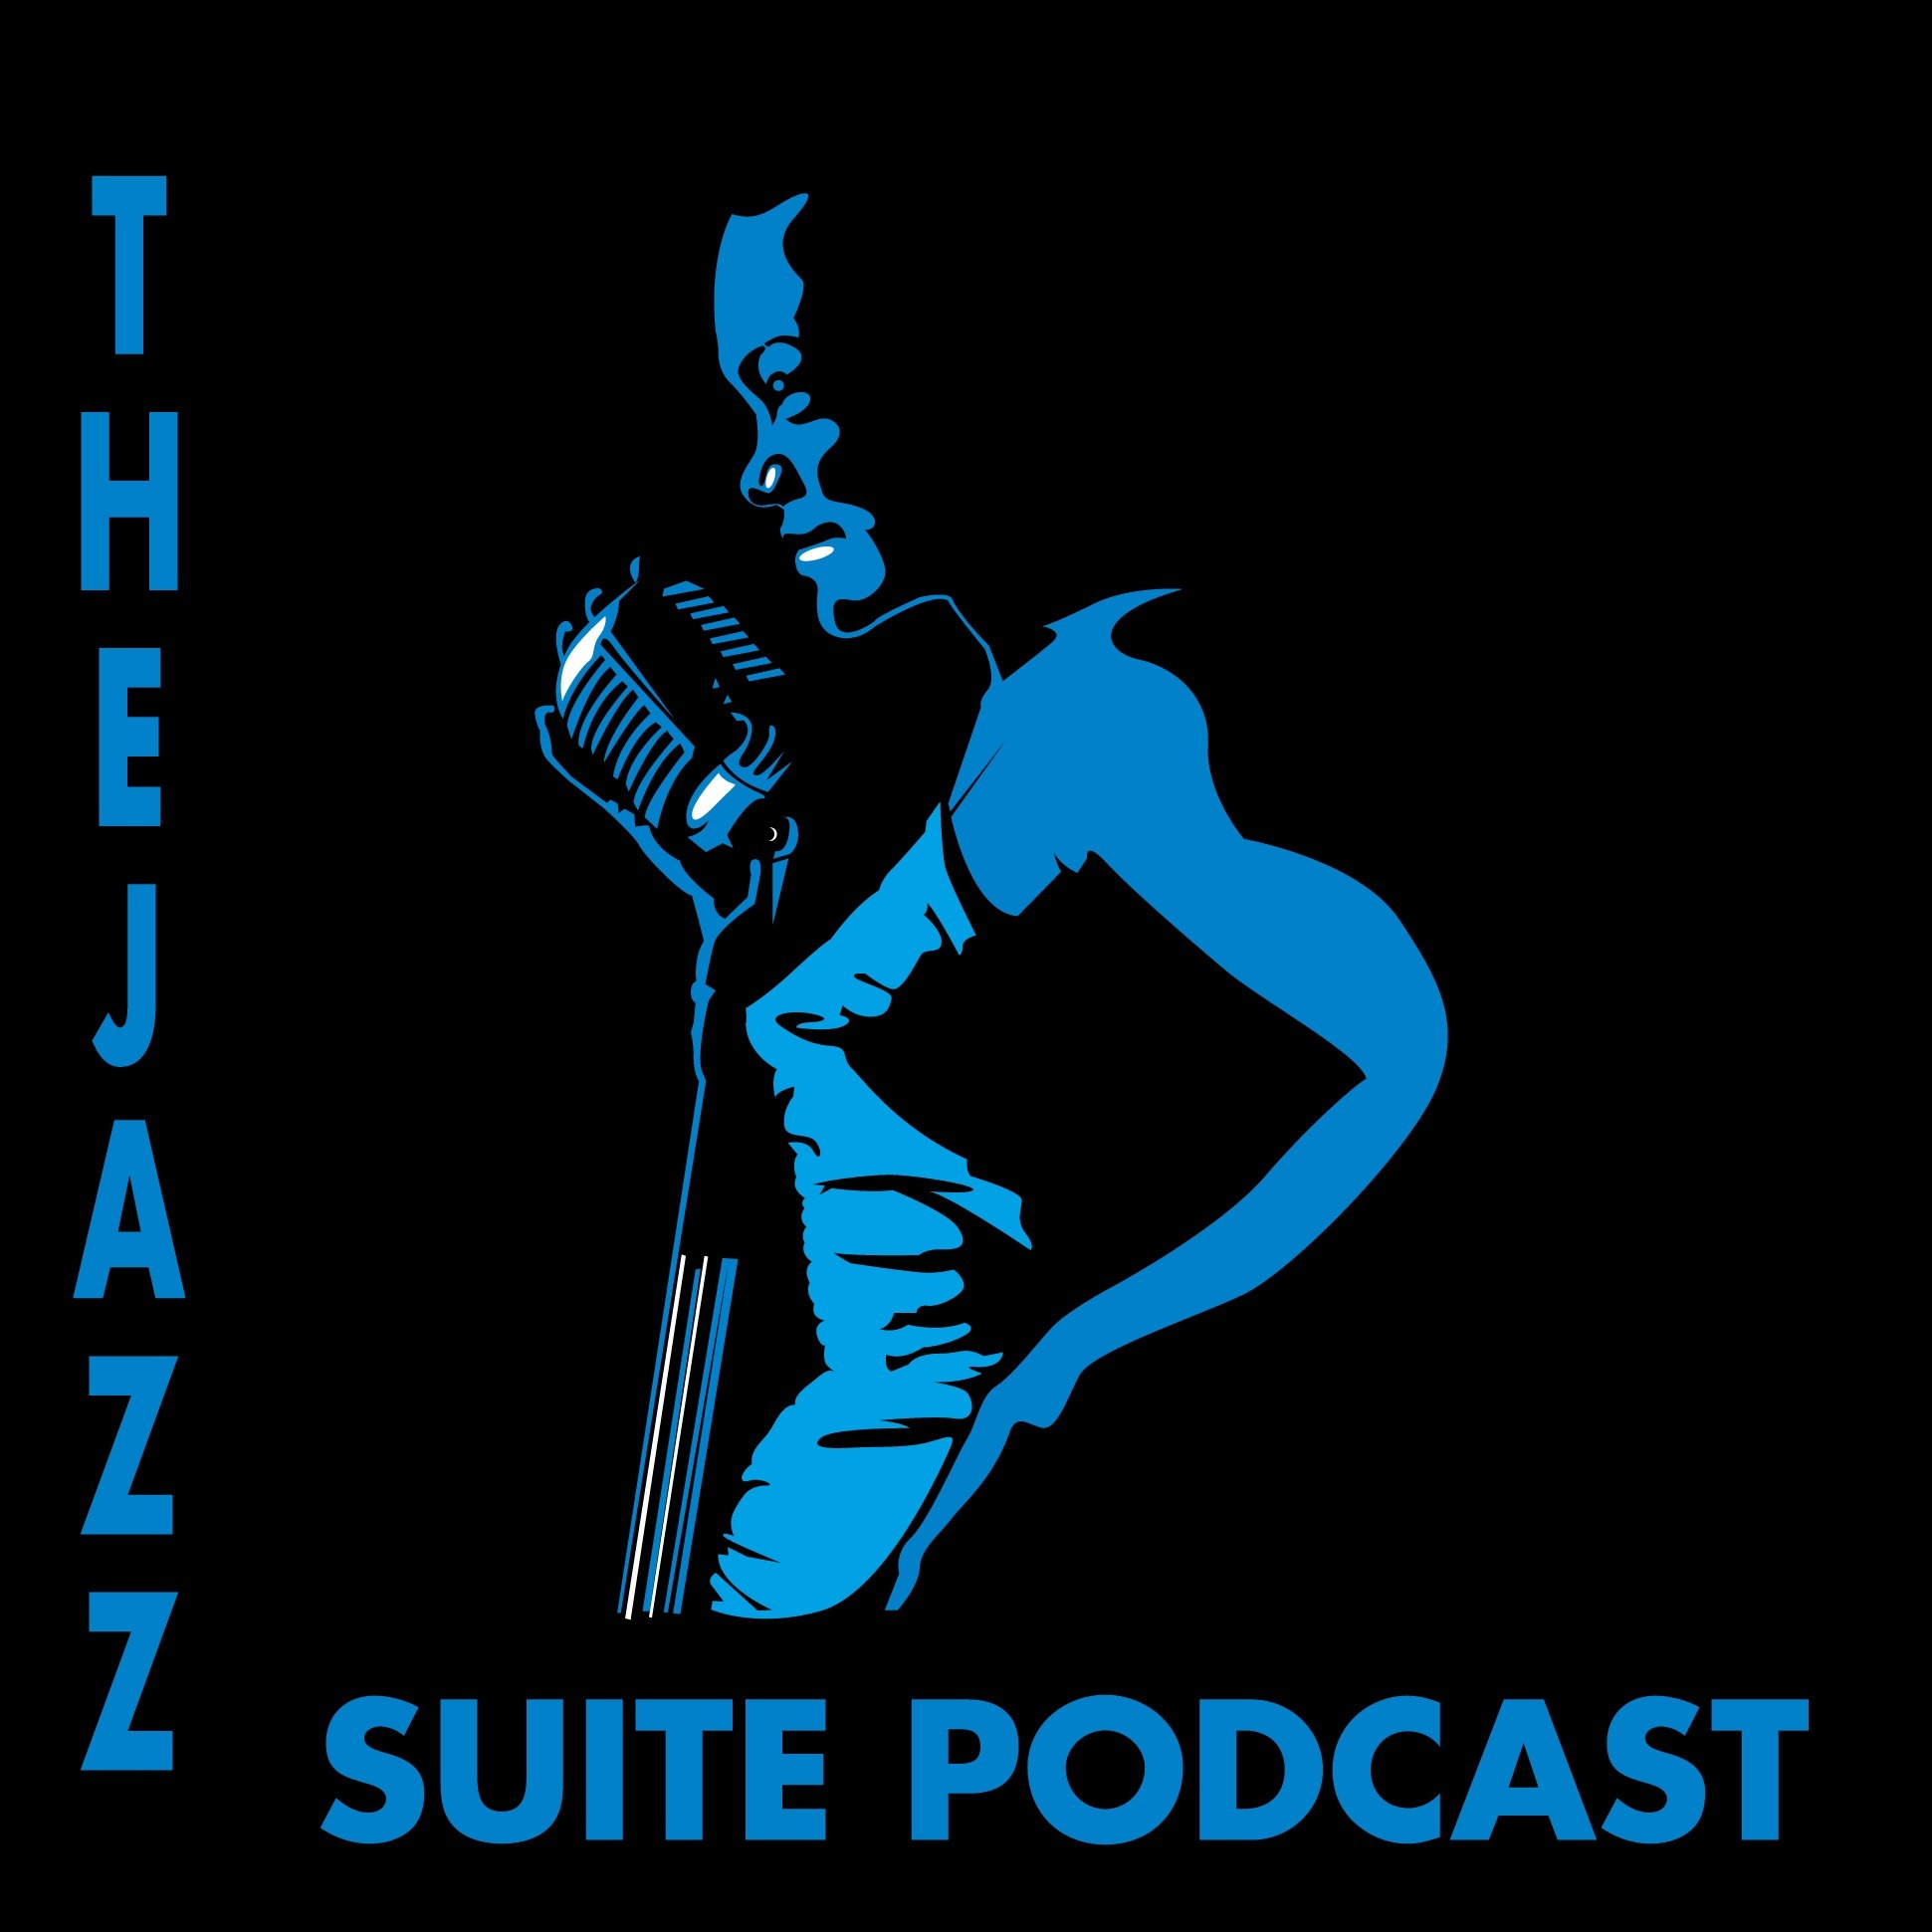 The Jazz Suite Podcast Show #466